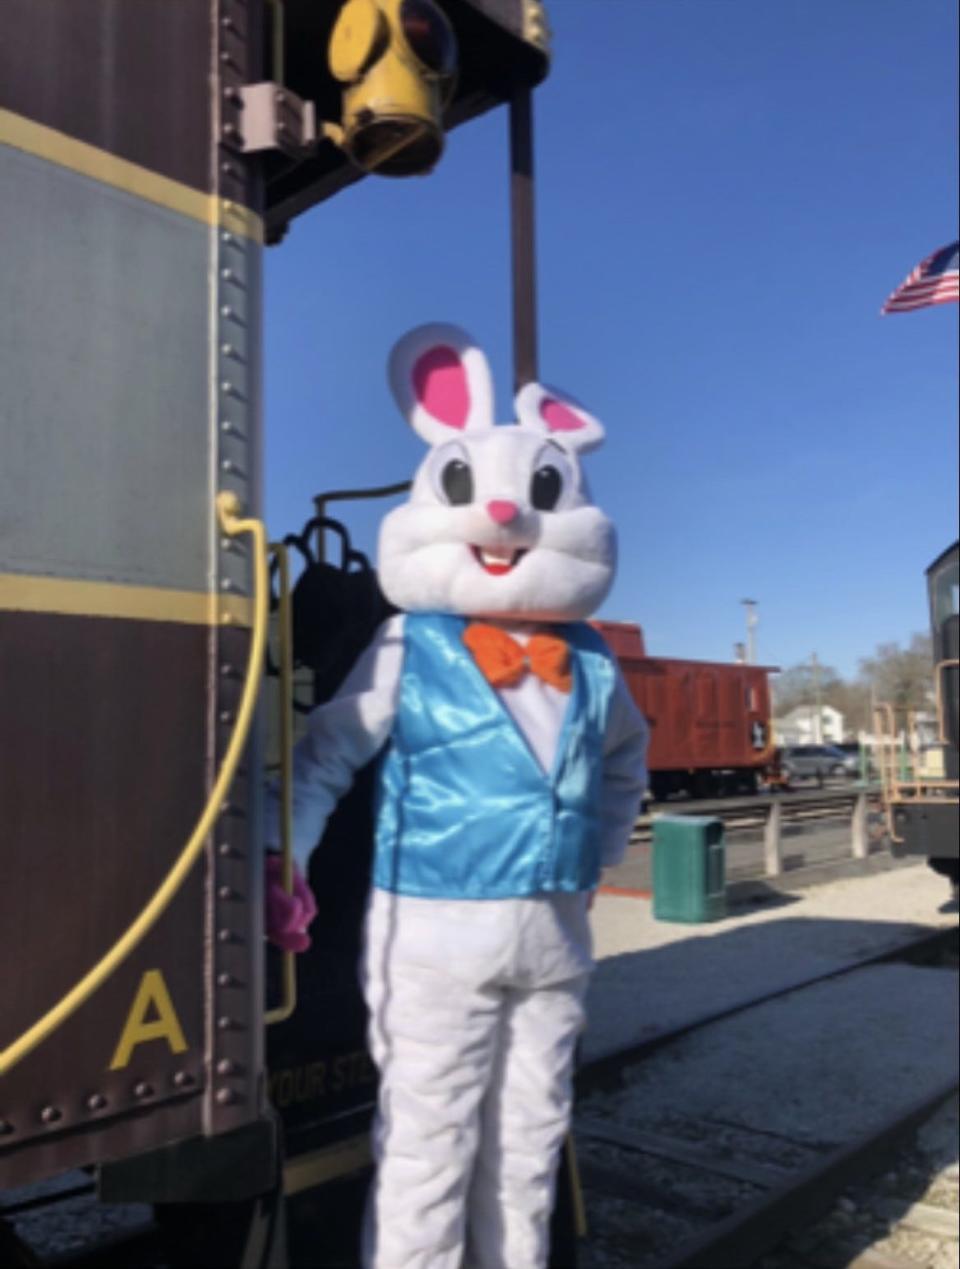 The Hoosier Valley Railroad Museum runs its annual Easter Train rides from its depot in North Judson, Ind., on April 1 and 8, 2023.